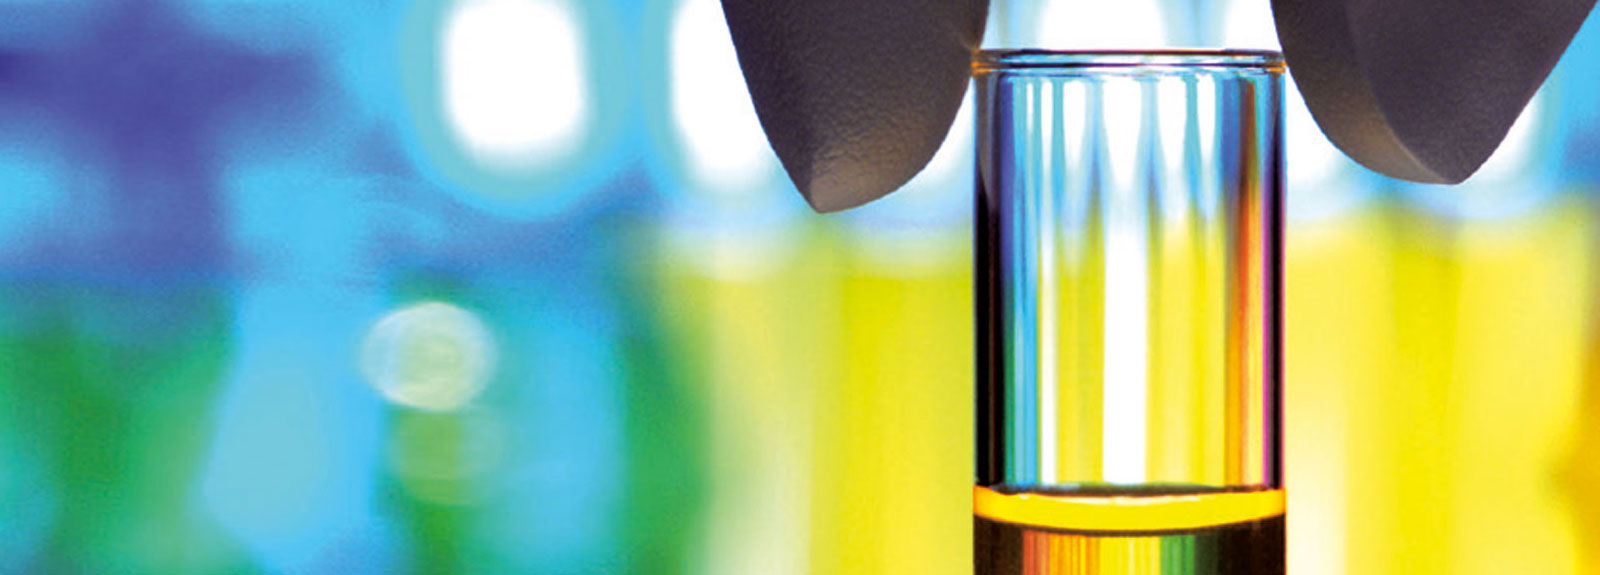 A half-filled test tube set against a colourful backdrop